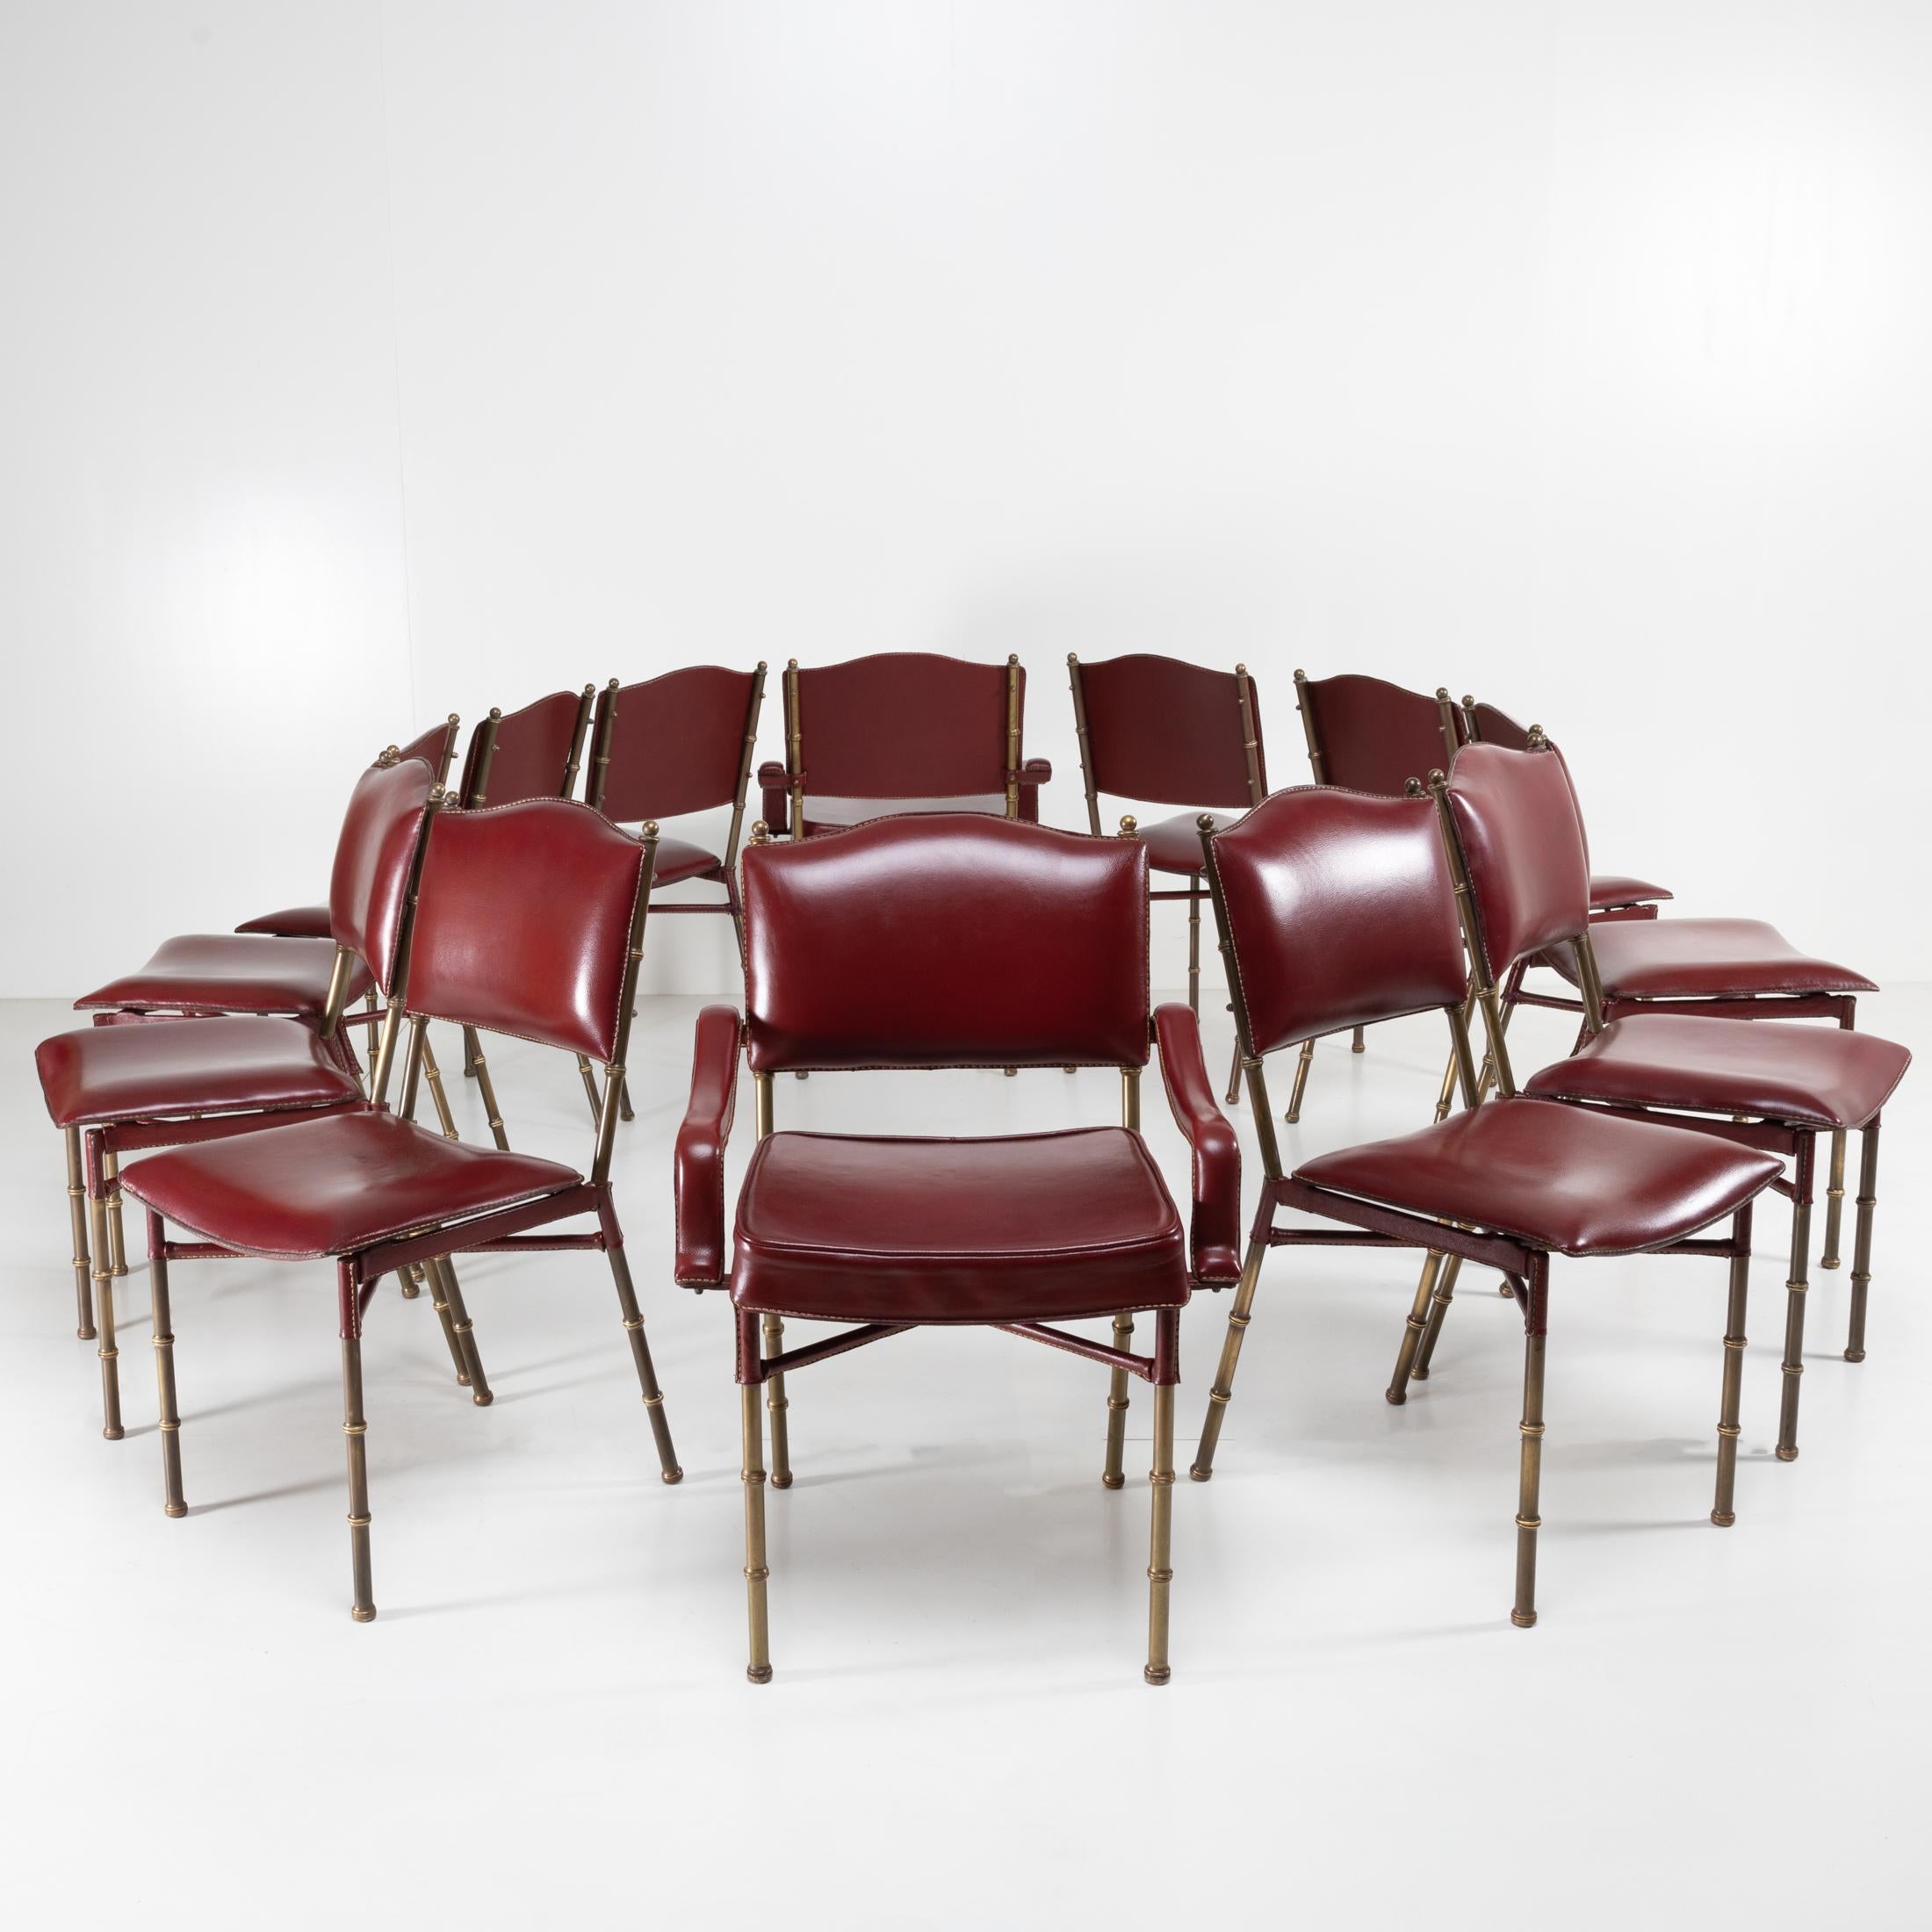 About this set of 12 chairs by Jacques Adnet
A rare set of 12 red leather saddle stitch chairs.
Composed of 10 chairs and 2 armchairs with steel armrests covered in leather. The chairs and the 2 armchairs consist of a steel structure covered in